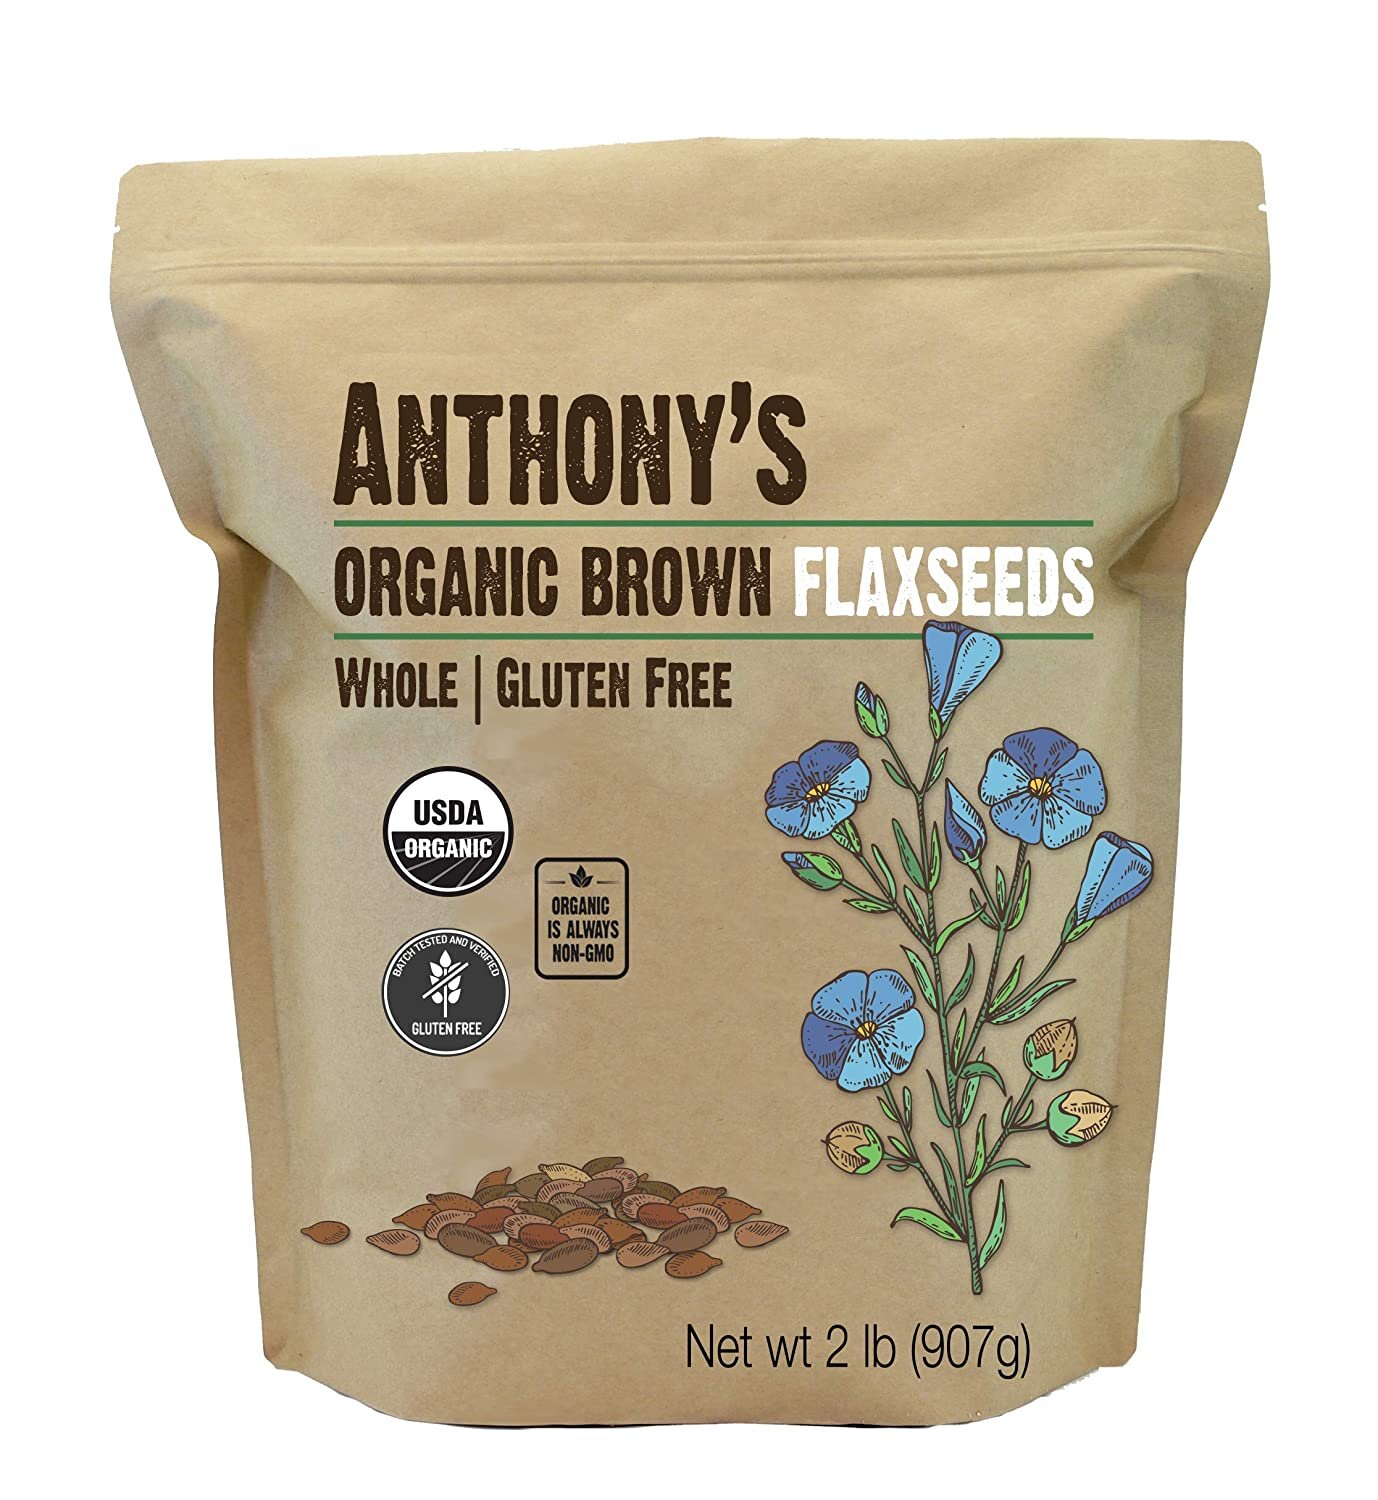 Anthony's Organic Brown Flaxseed